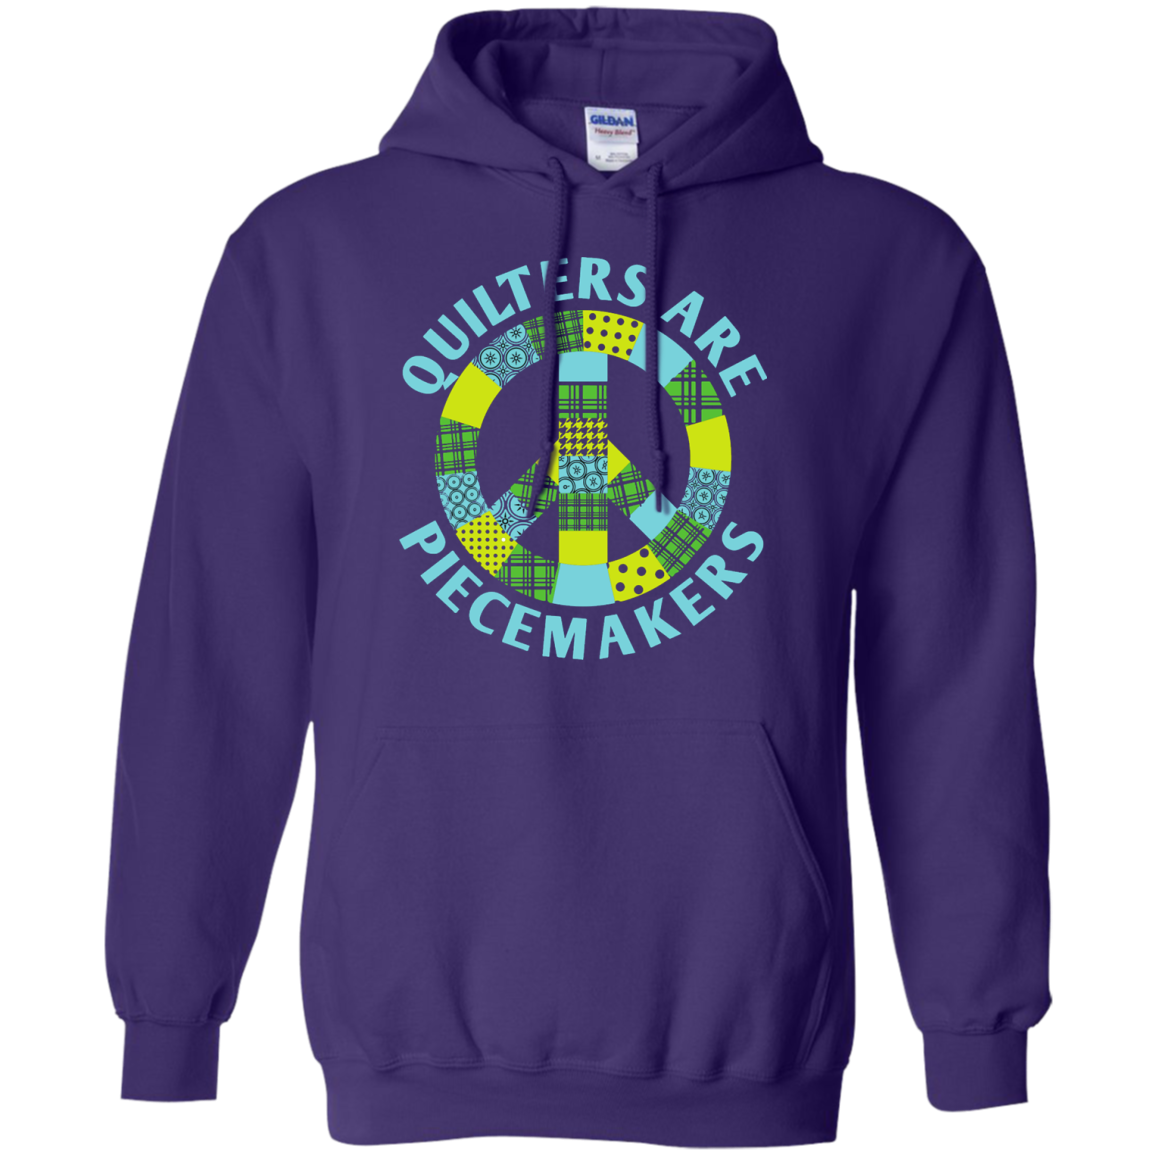 Quilters are Piecemakers Pullover Hoodies - Crafter4Life - 10